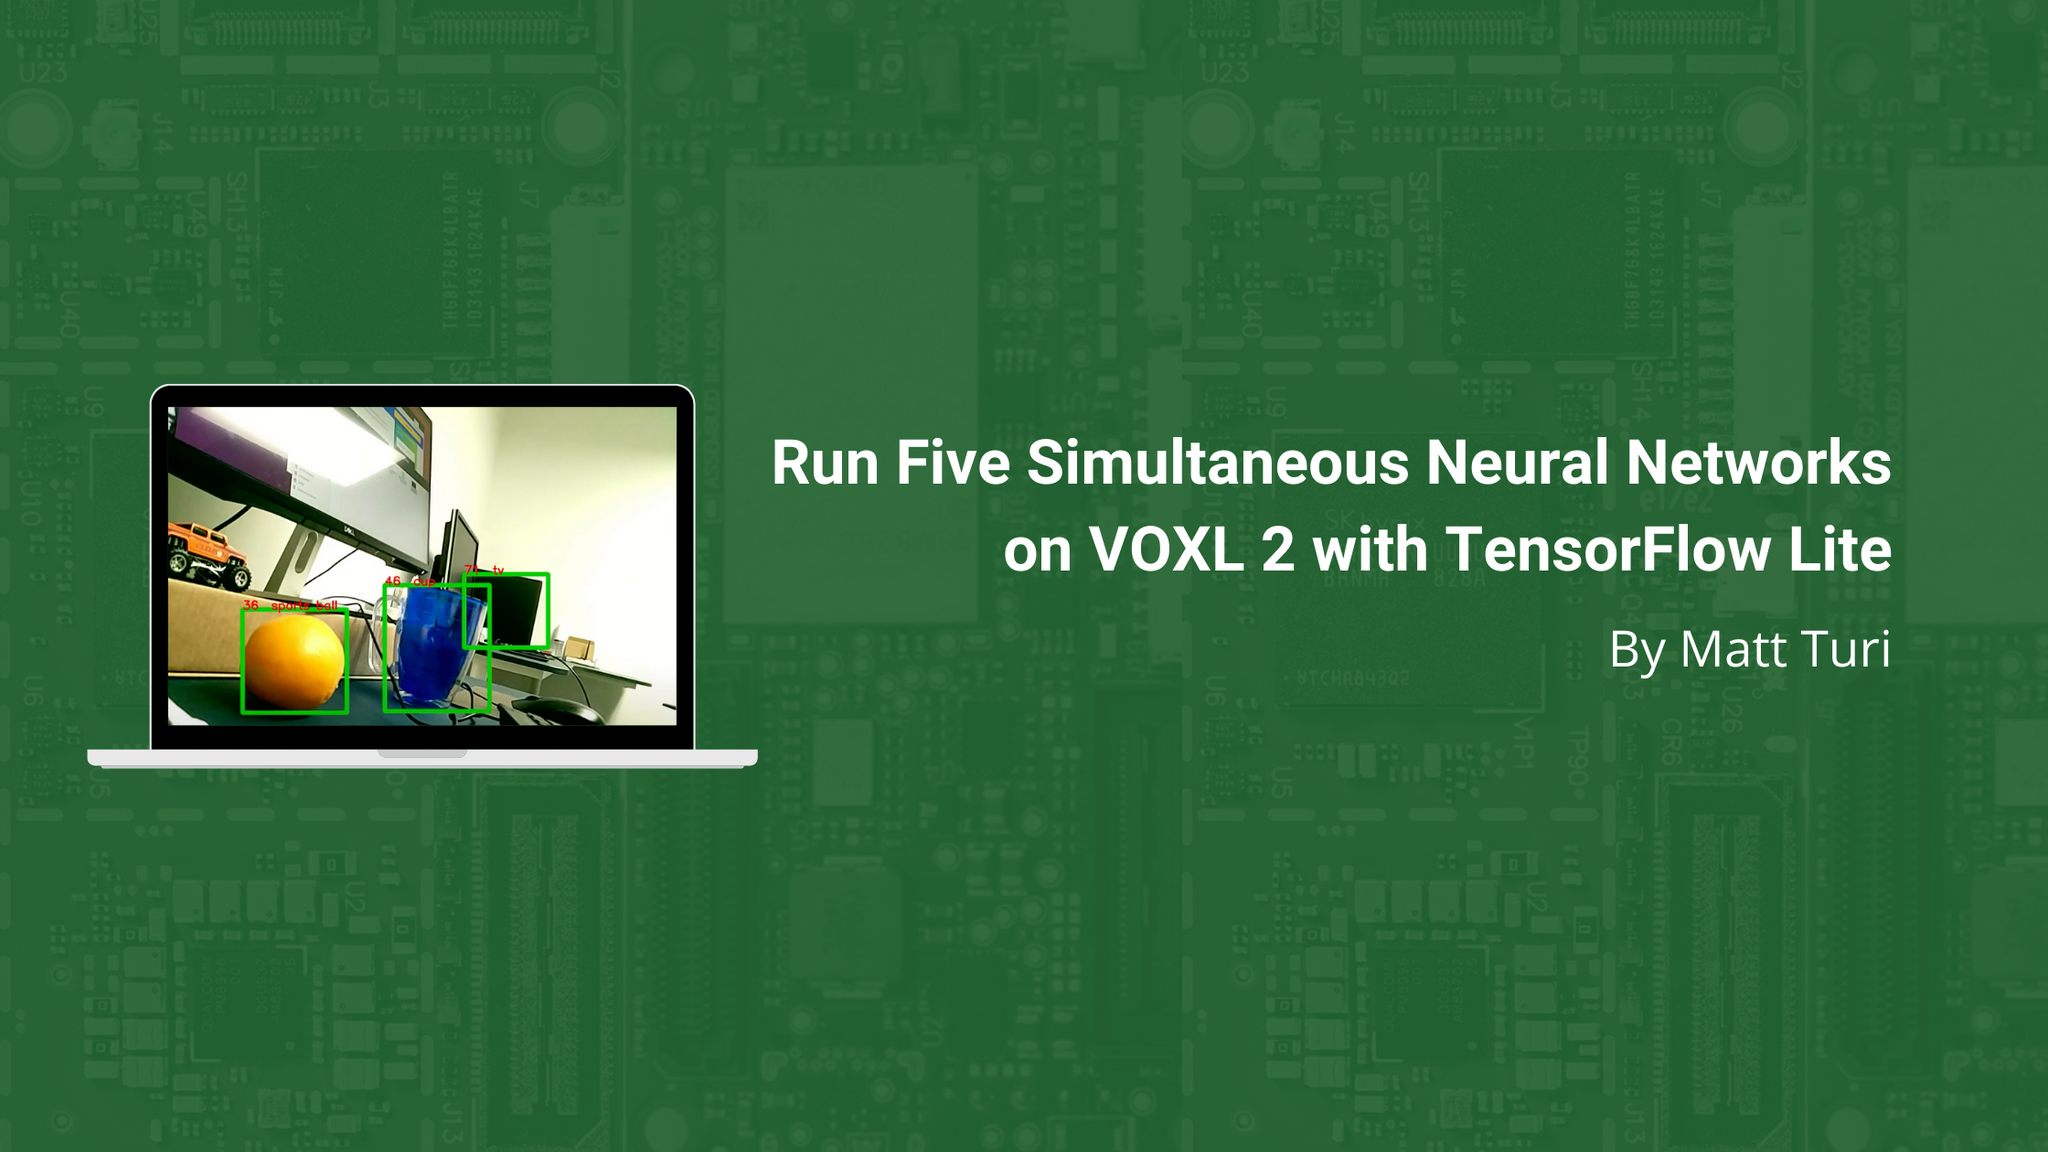 Run Five Simultaneous Neural Networks on VOXL 2 with TensorFlow Lite